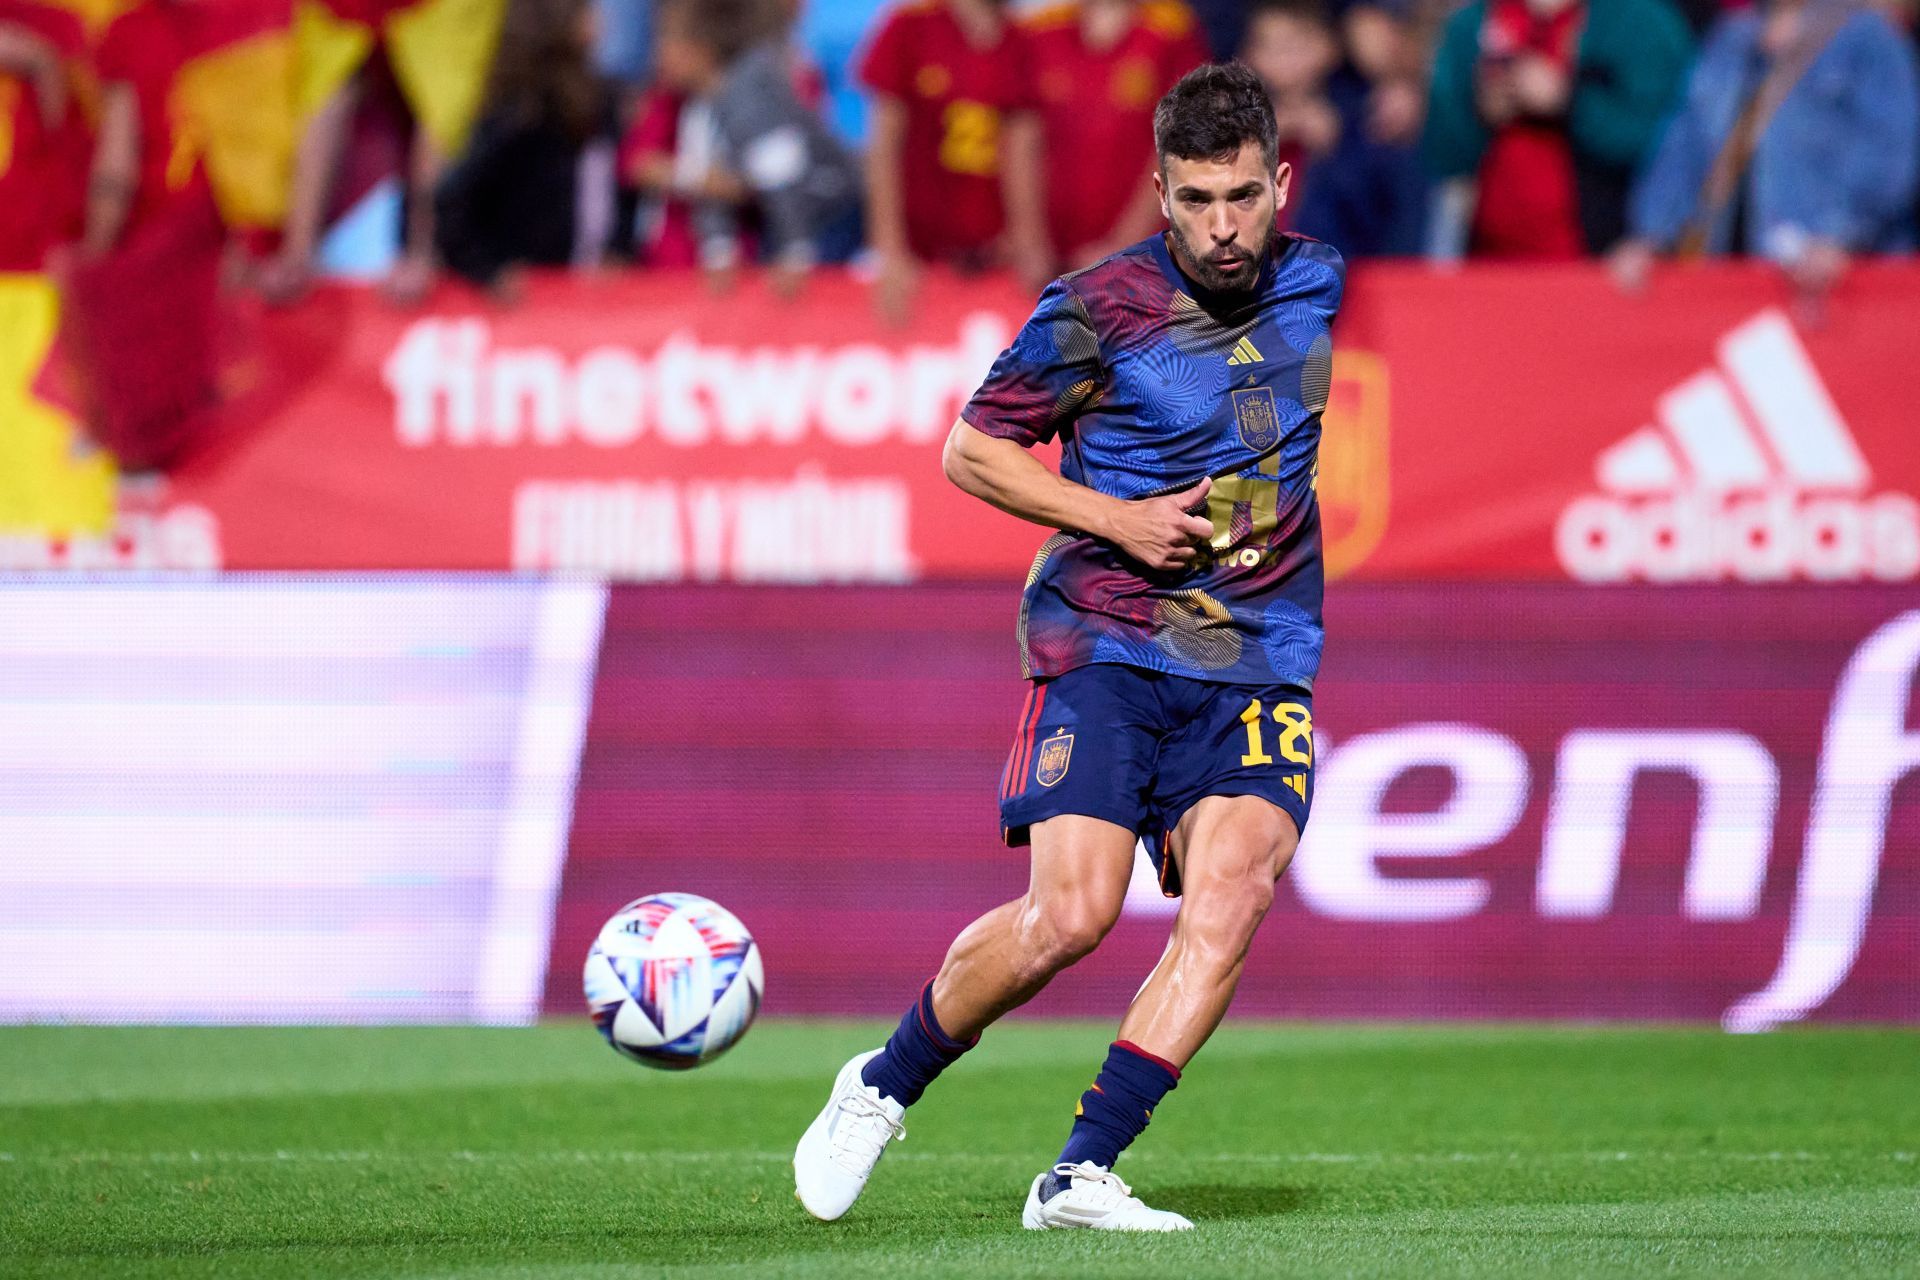 Jordi Alba is currently facing stern competition from Alex Balde for the left-back spot at Barca.